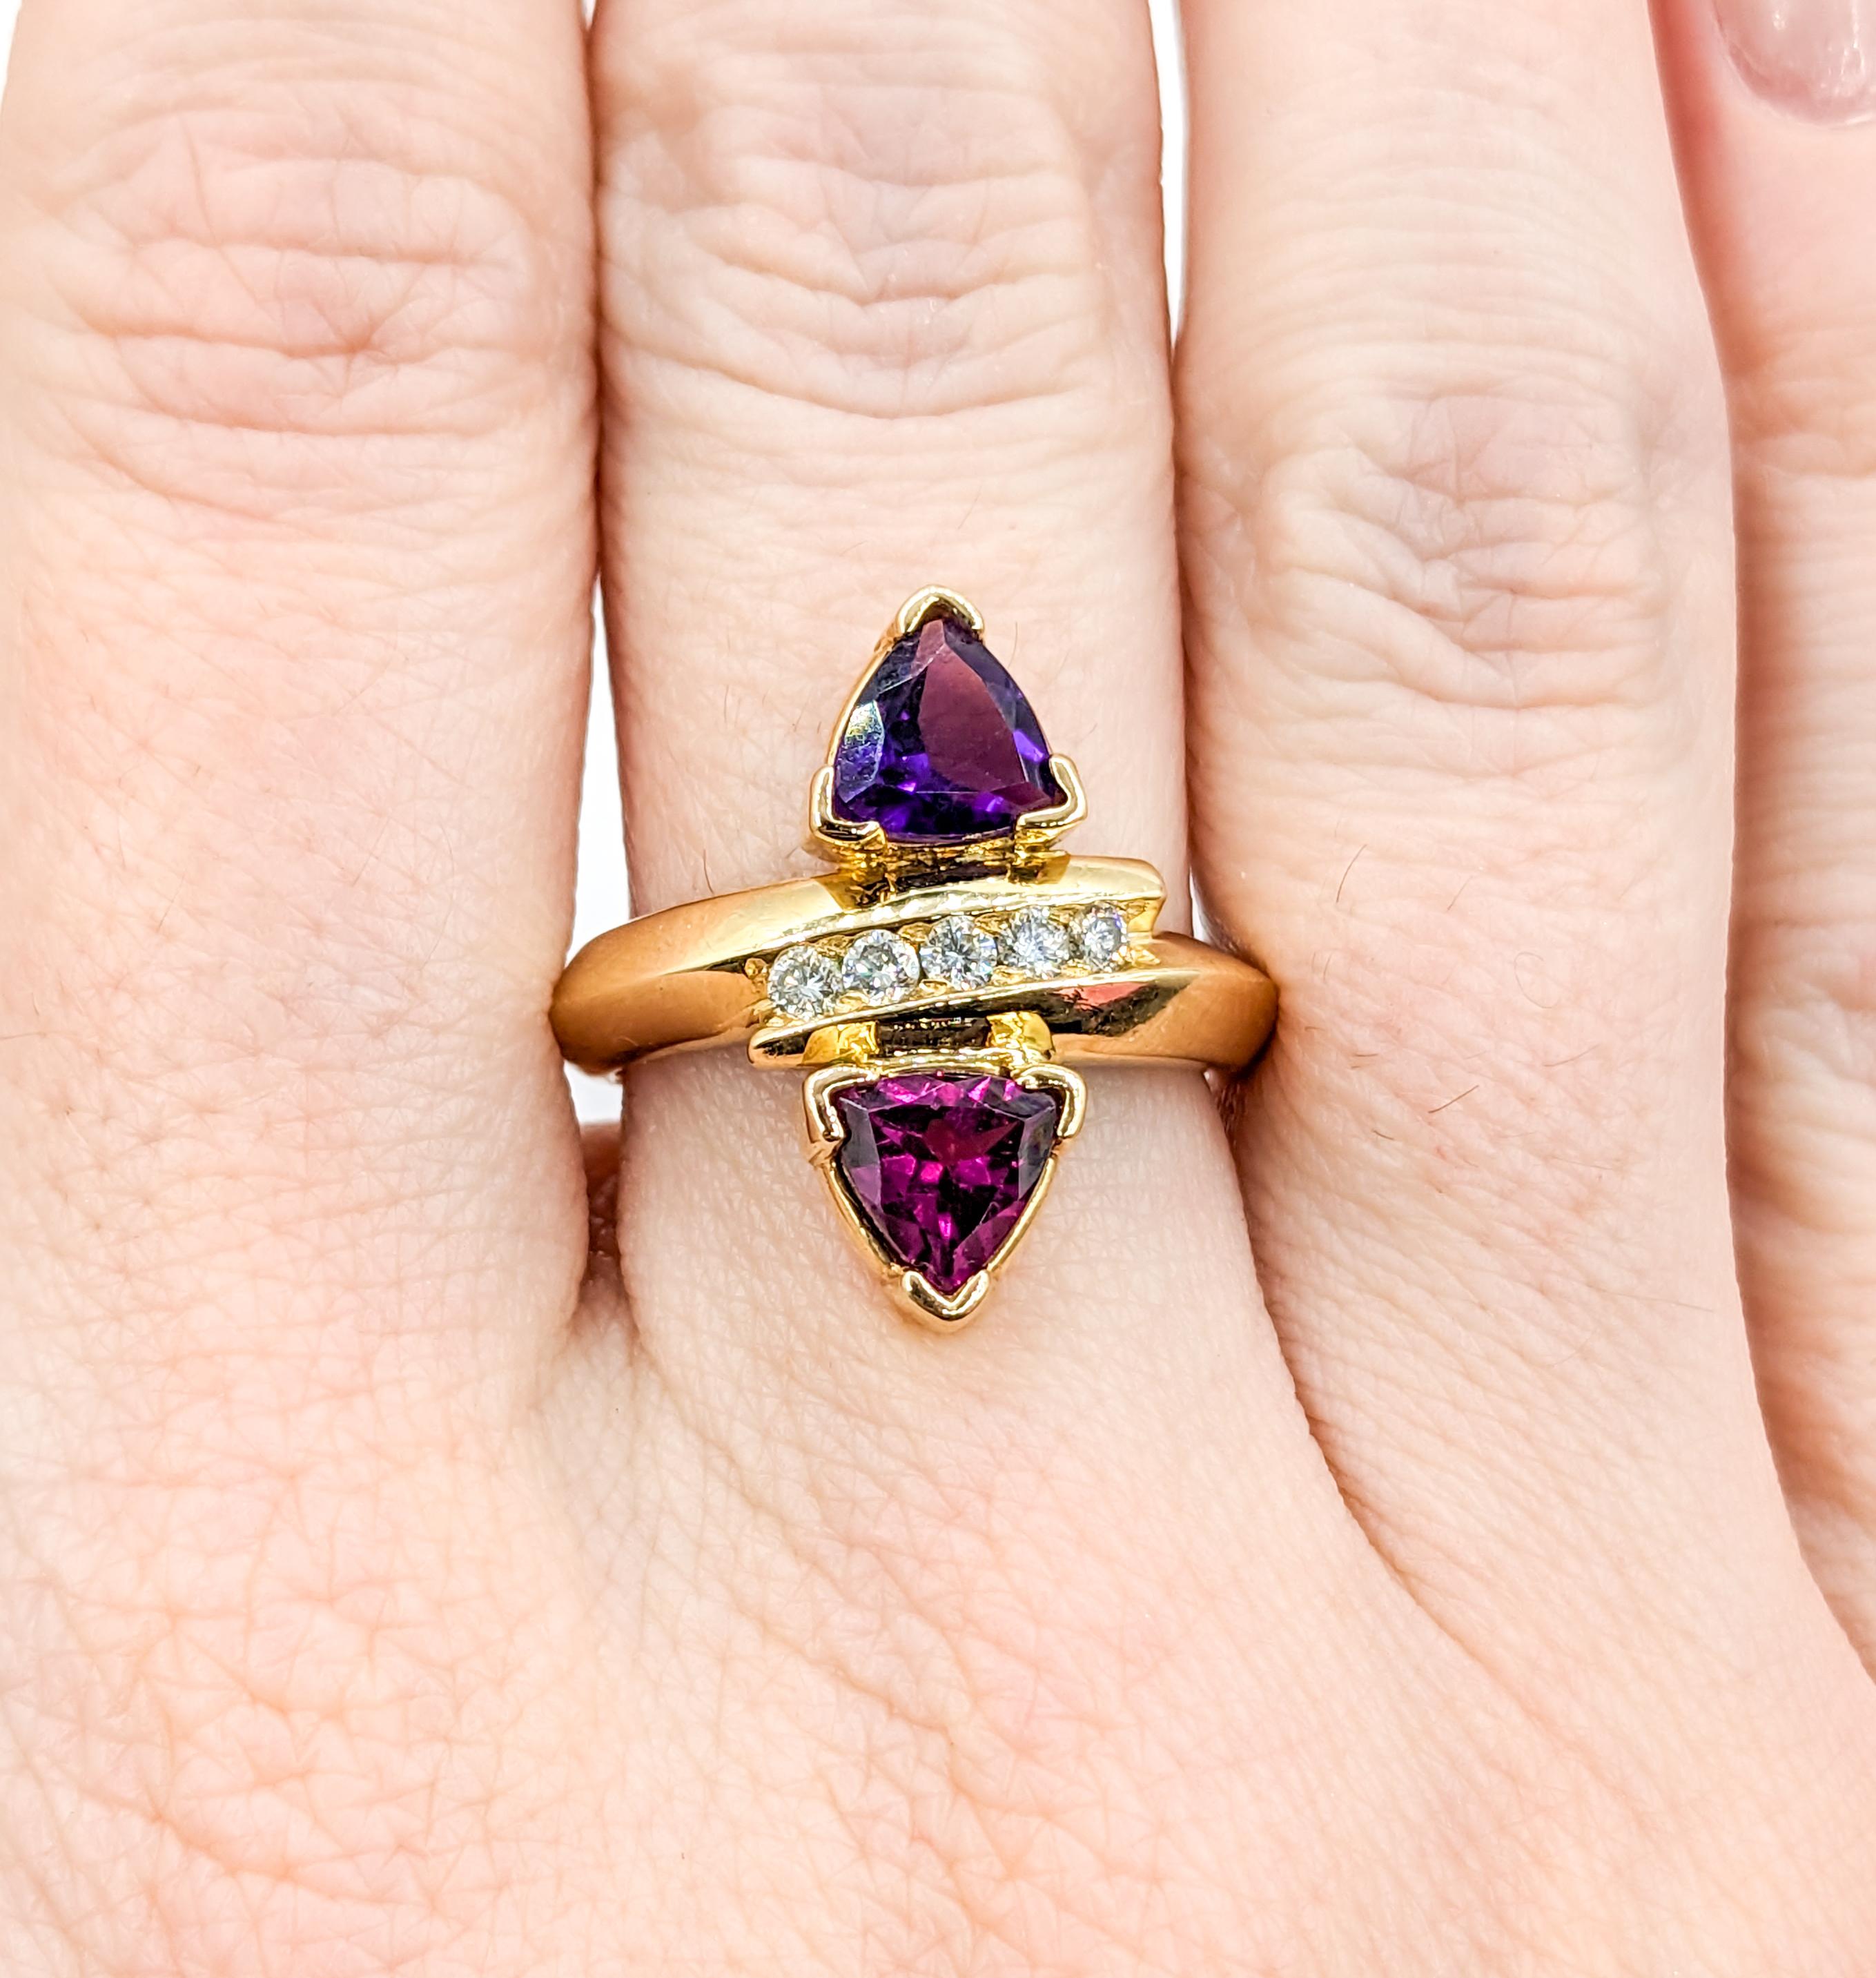 Vintage Trillion Cut Amethyst, Garnet, & Diamond Ring in Gold In Excellent Condition For Sale In Bloomington, MN